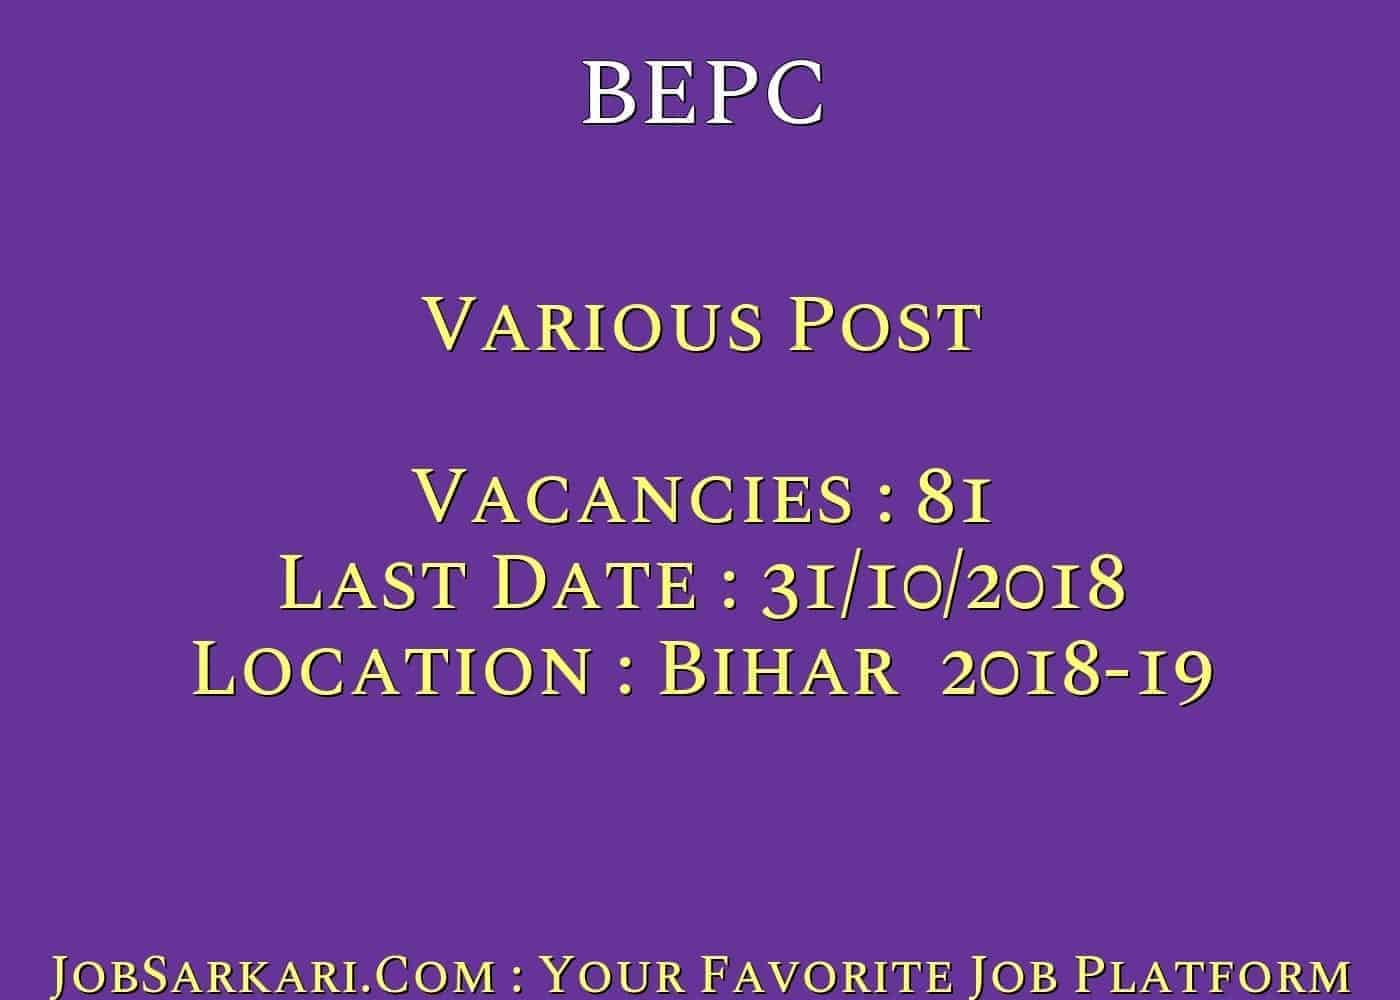 BEPC Recruitment 2018 For Various Post